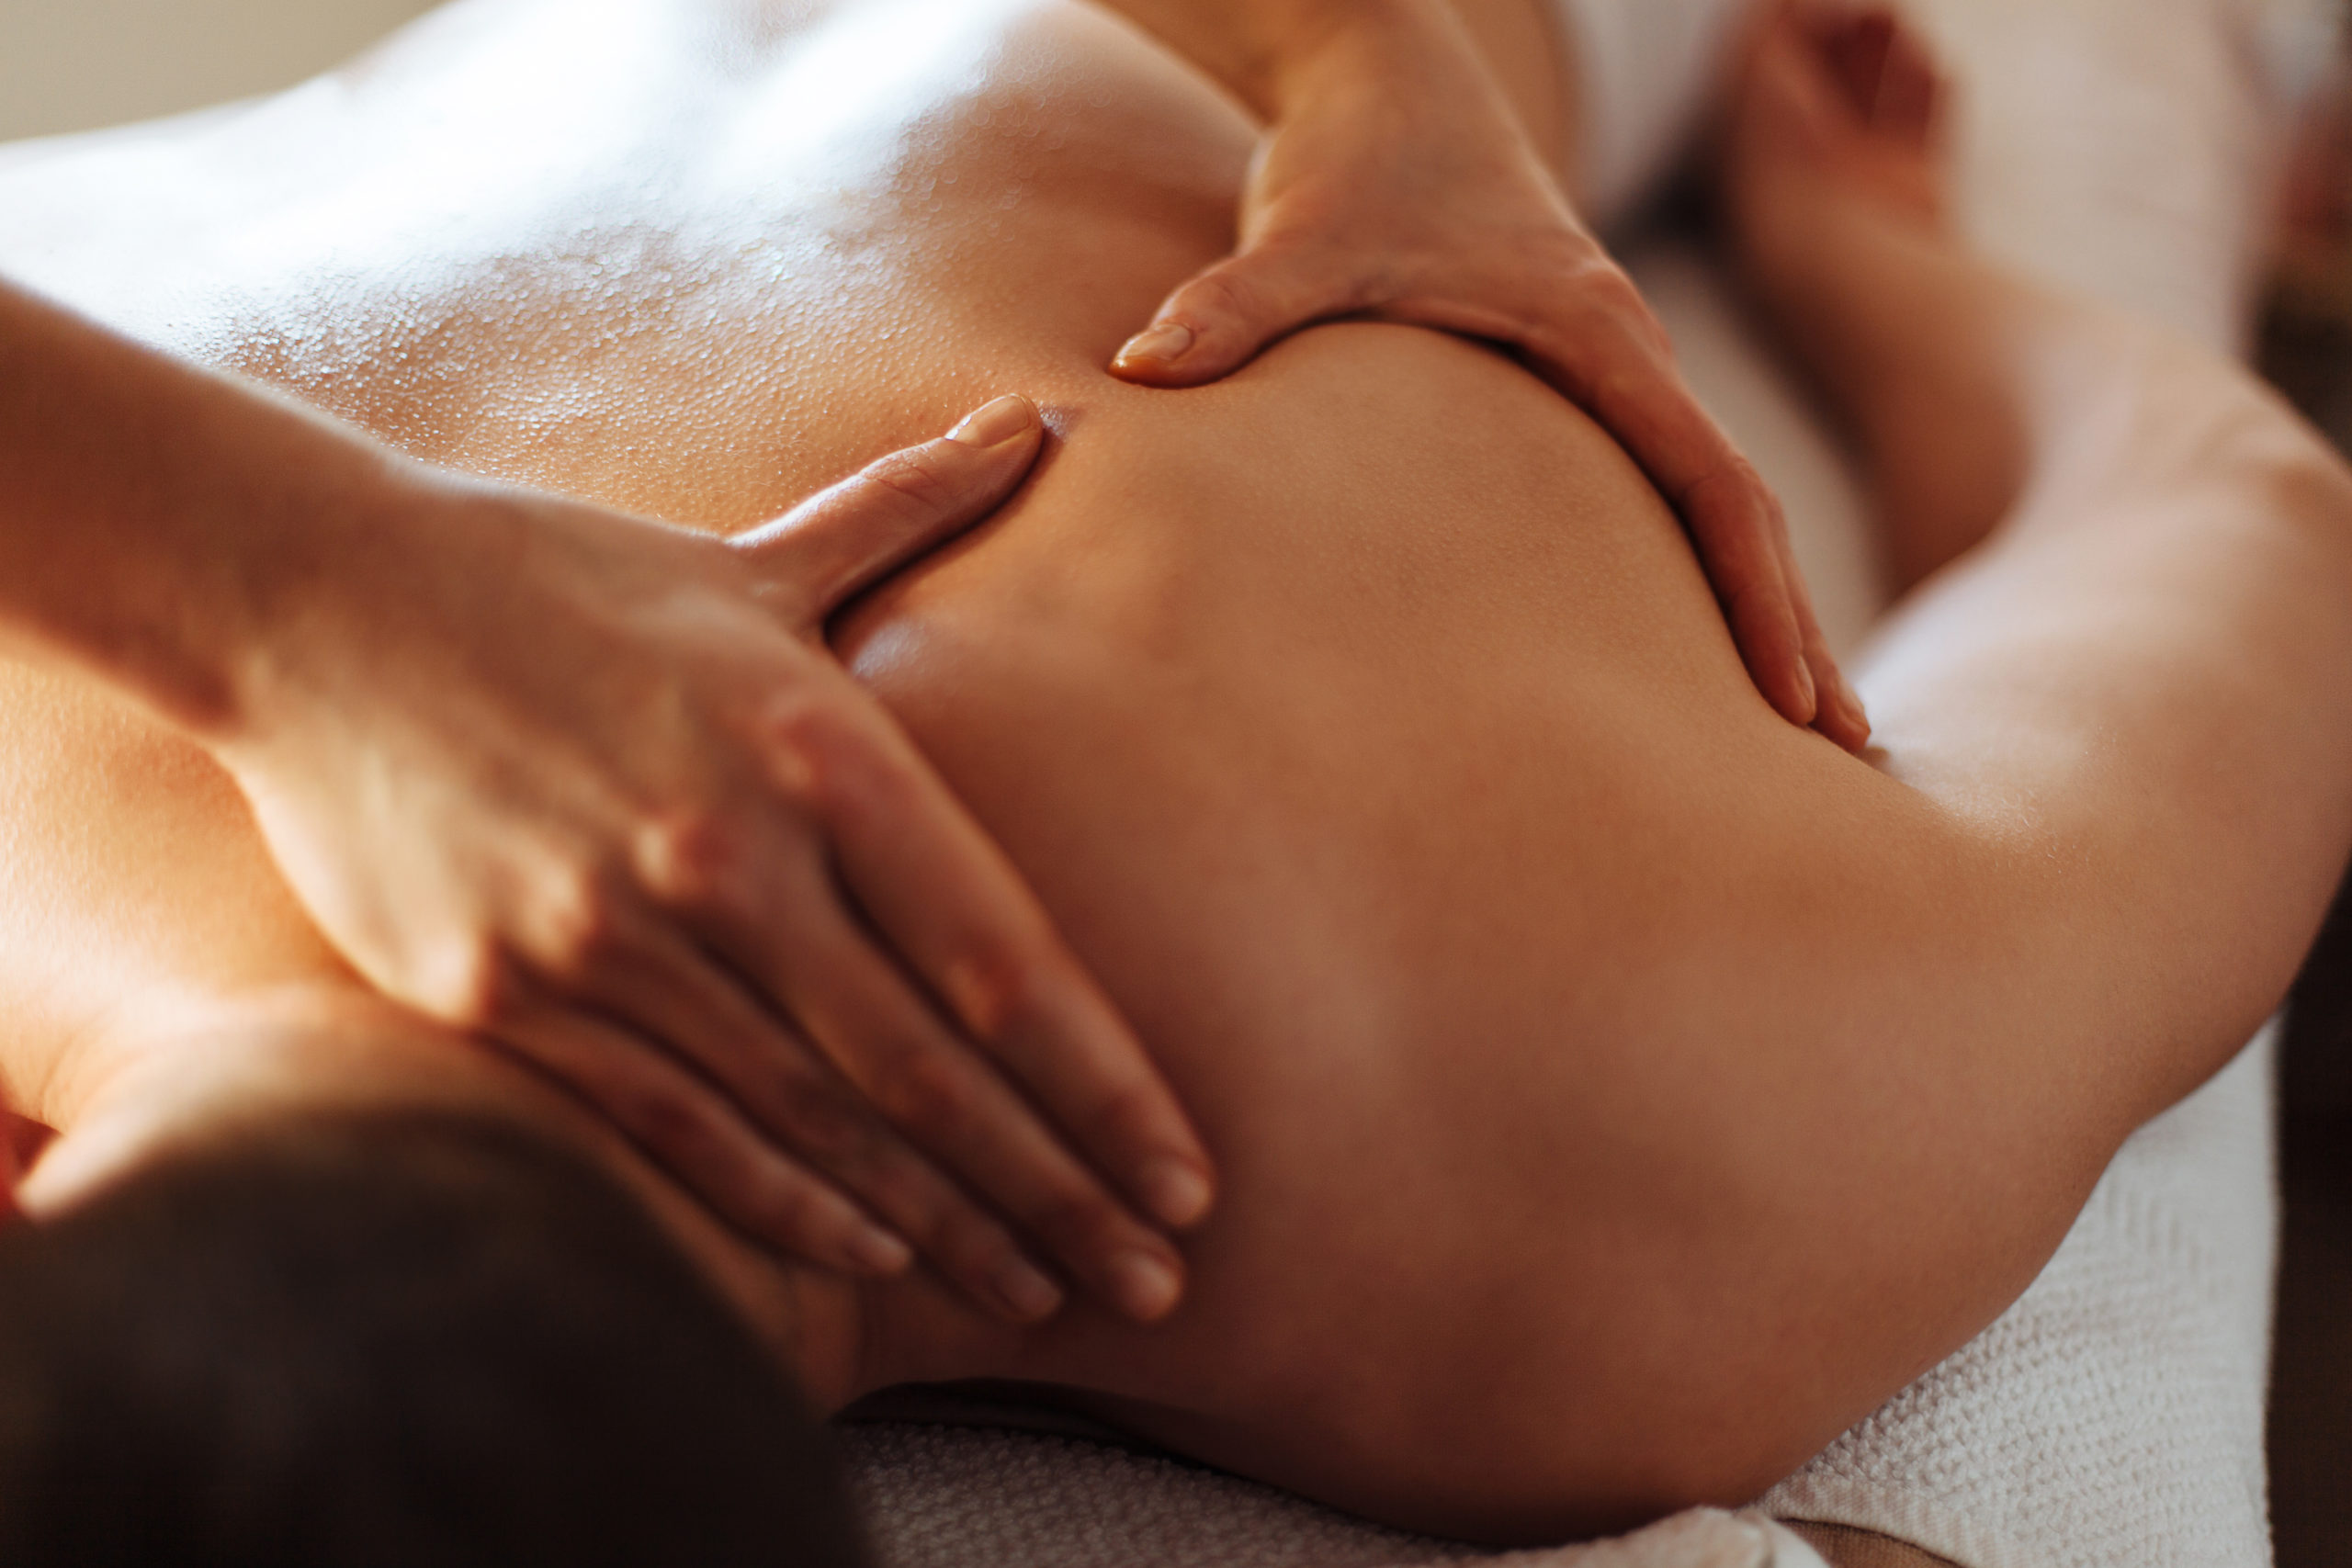 What to expect during a Lomi Lomi Massage